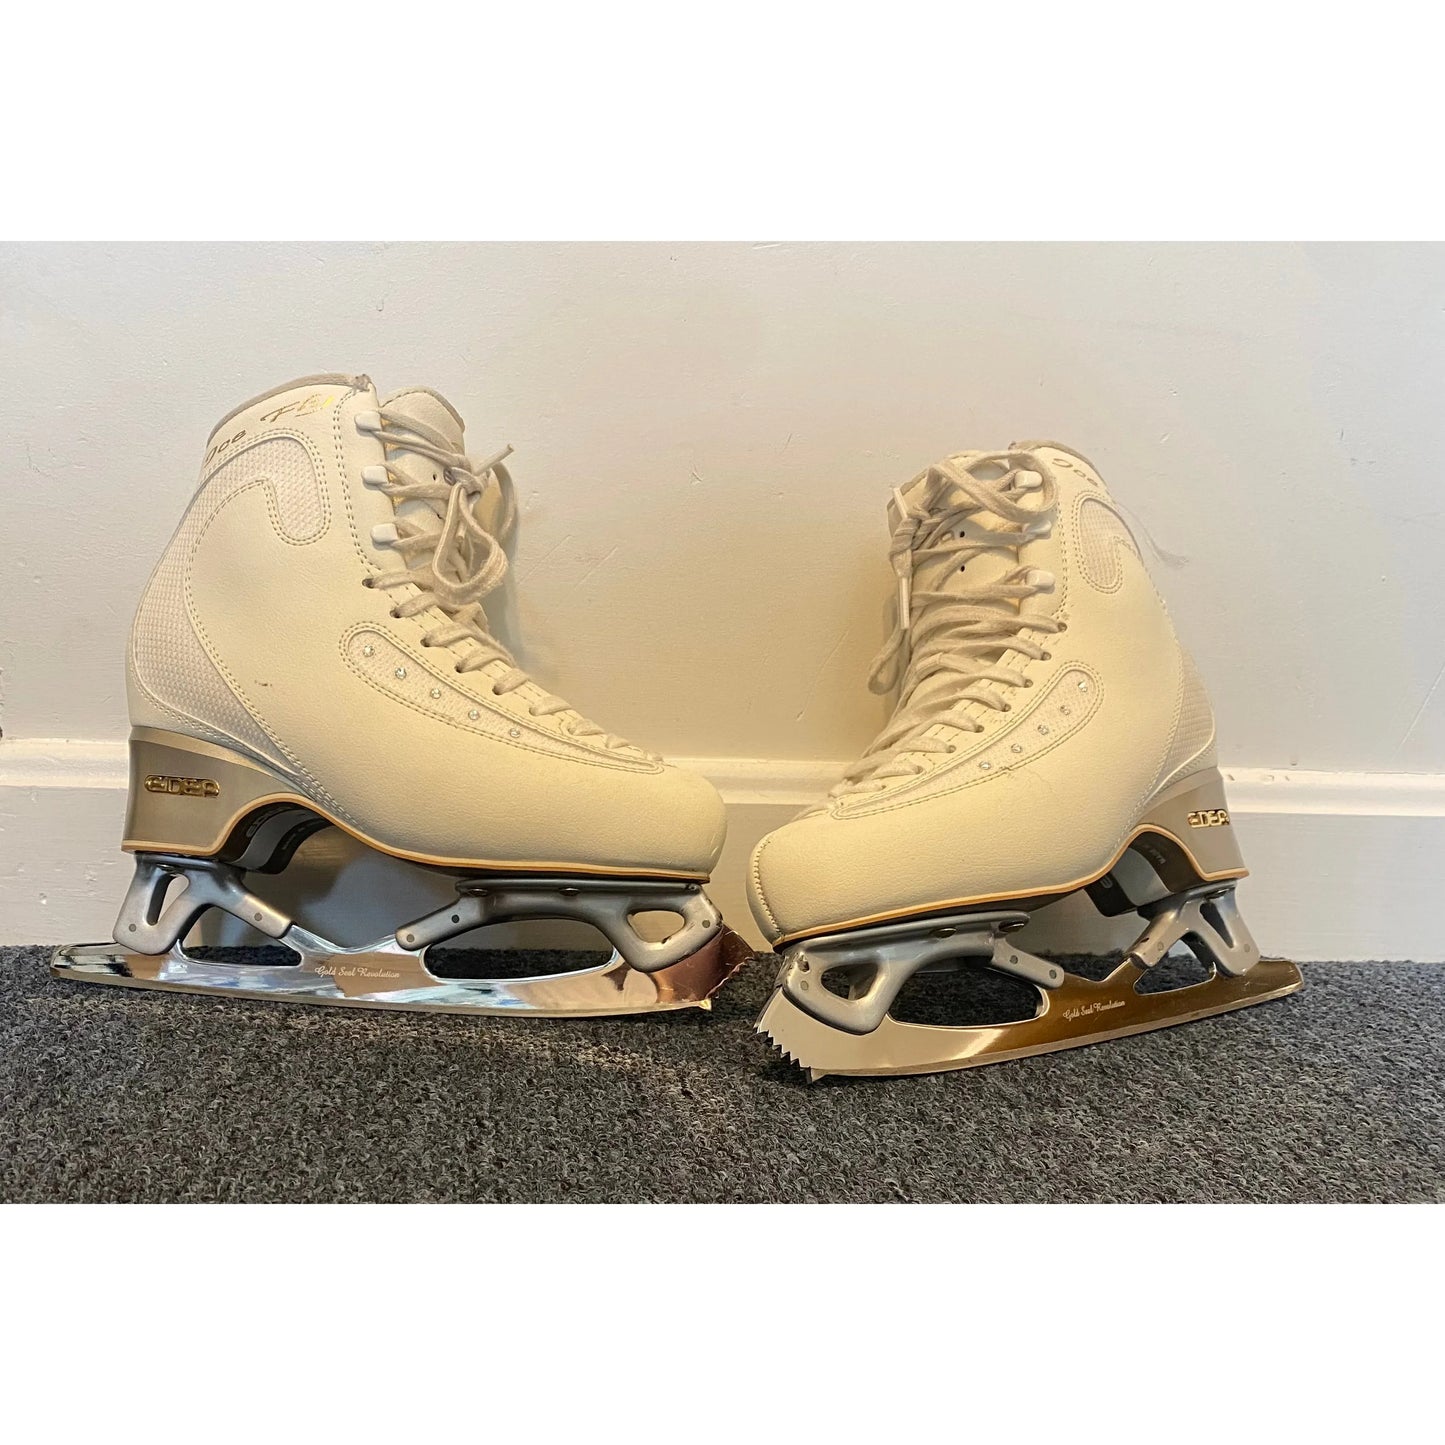 Used Edea Ice Fly Boot 230 B w/ Gold Seal Revolution Blade